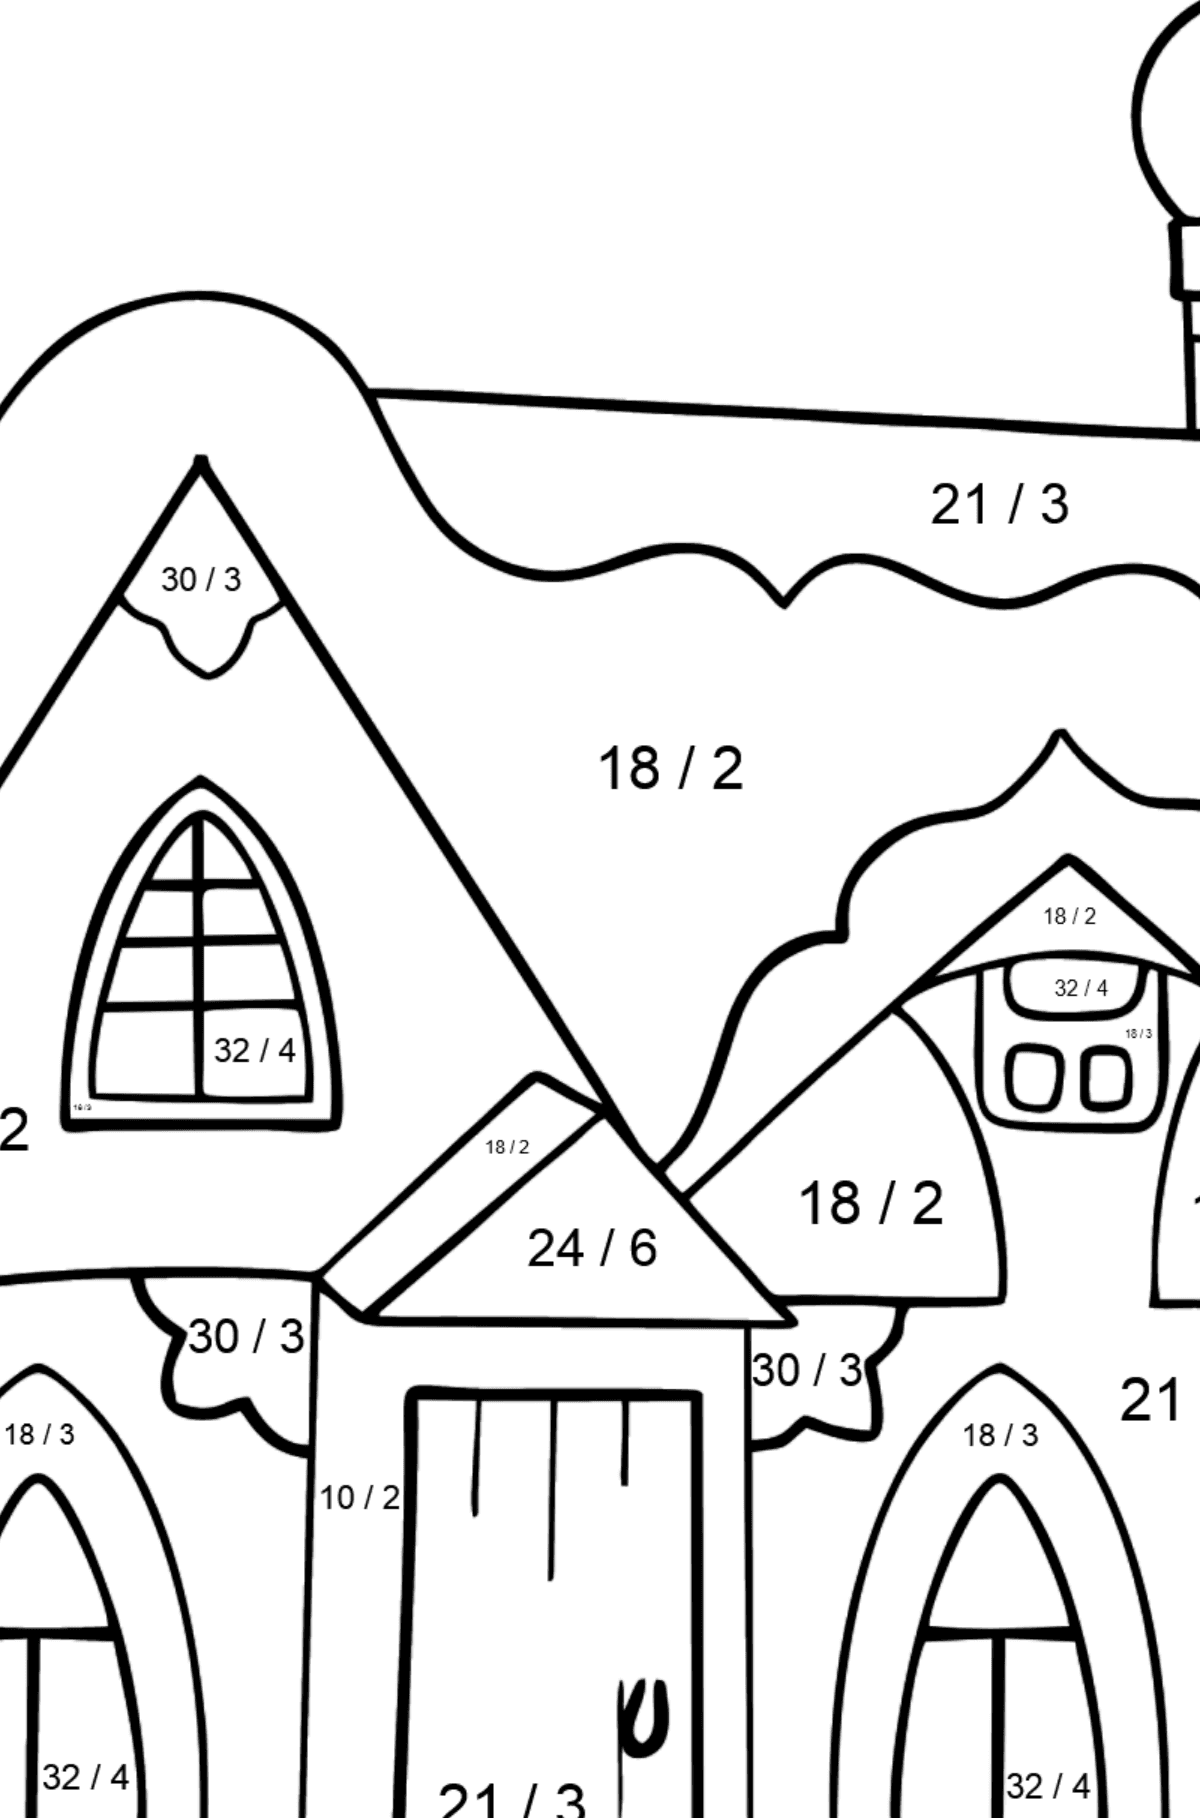 Coloring Page - A Fairytale House - Math Coloring - Division for Kids